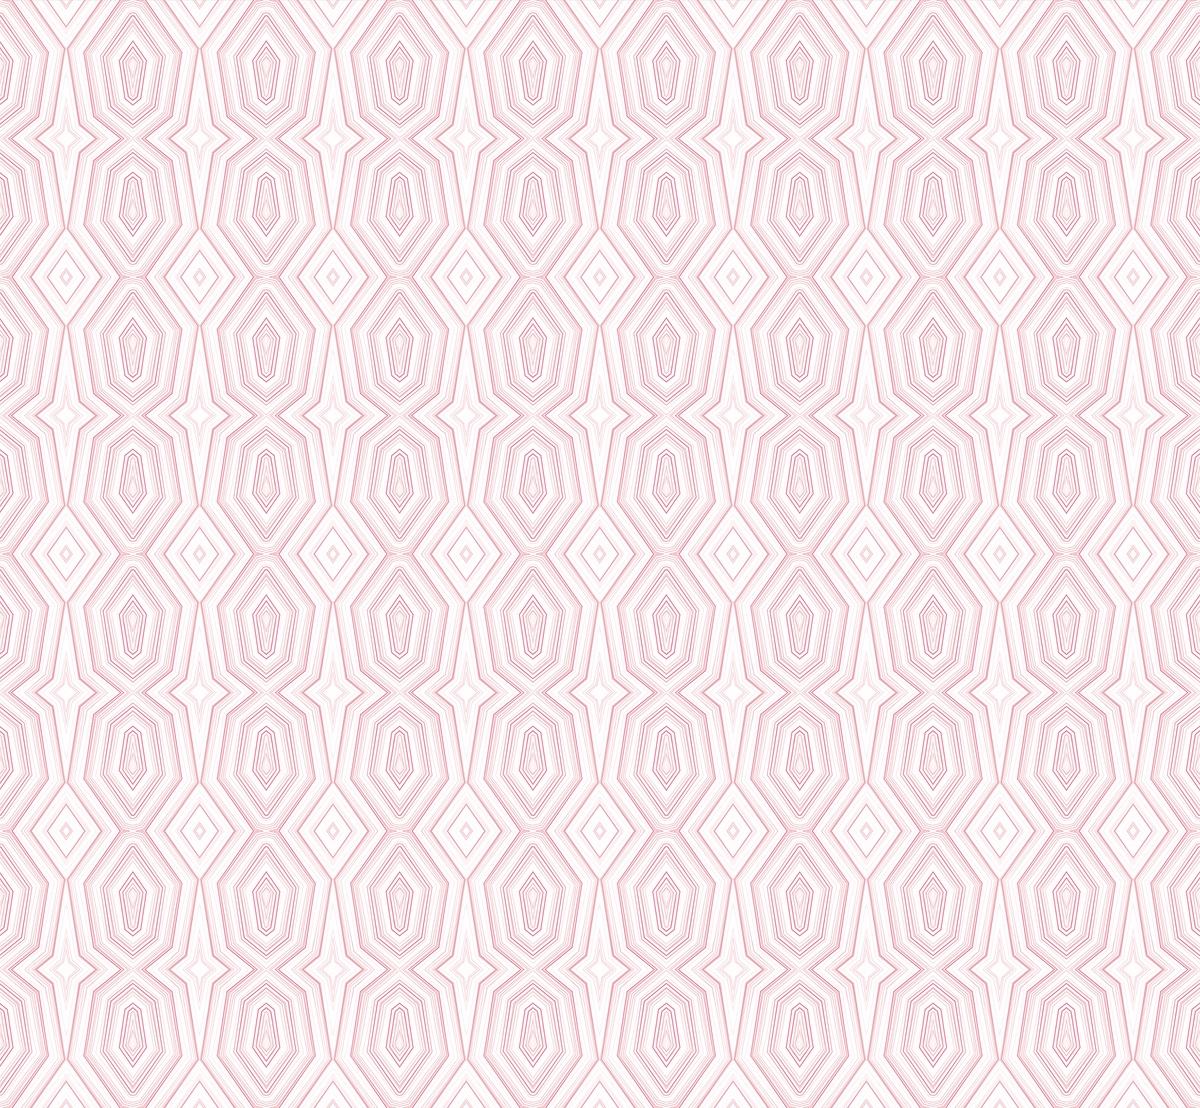 Keyhole pattern in pink and white